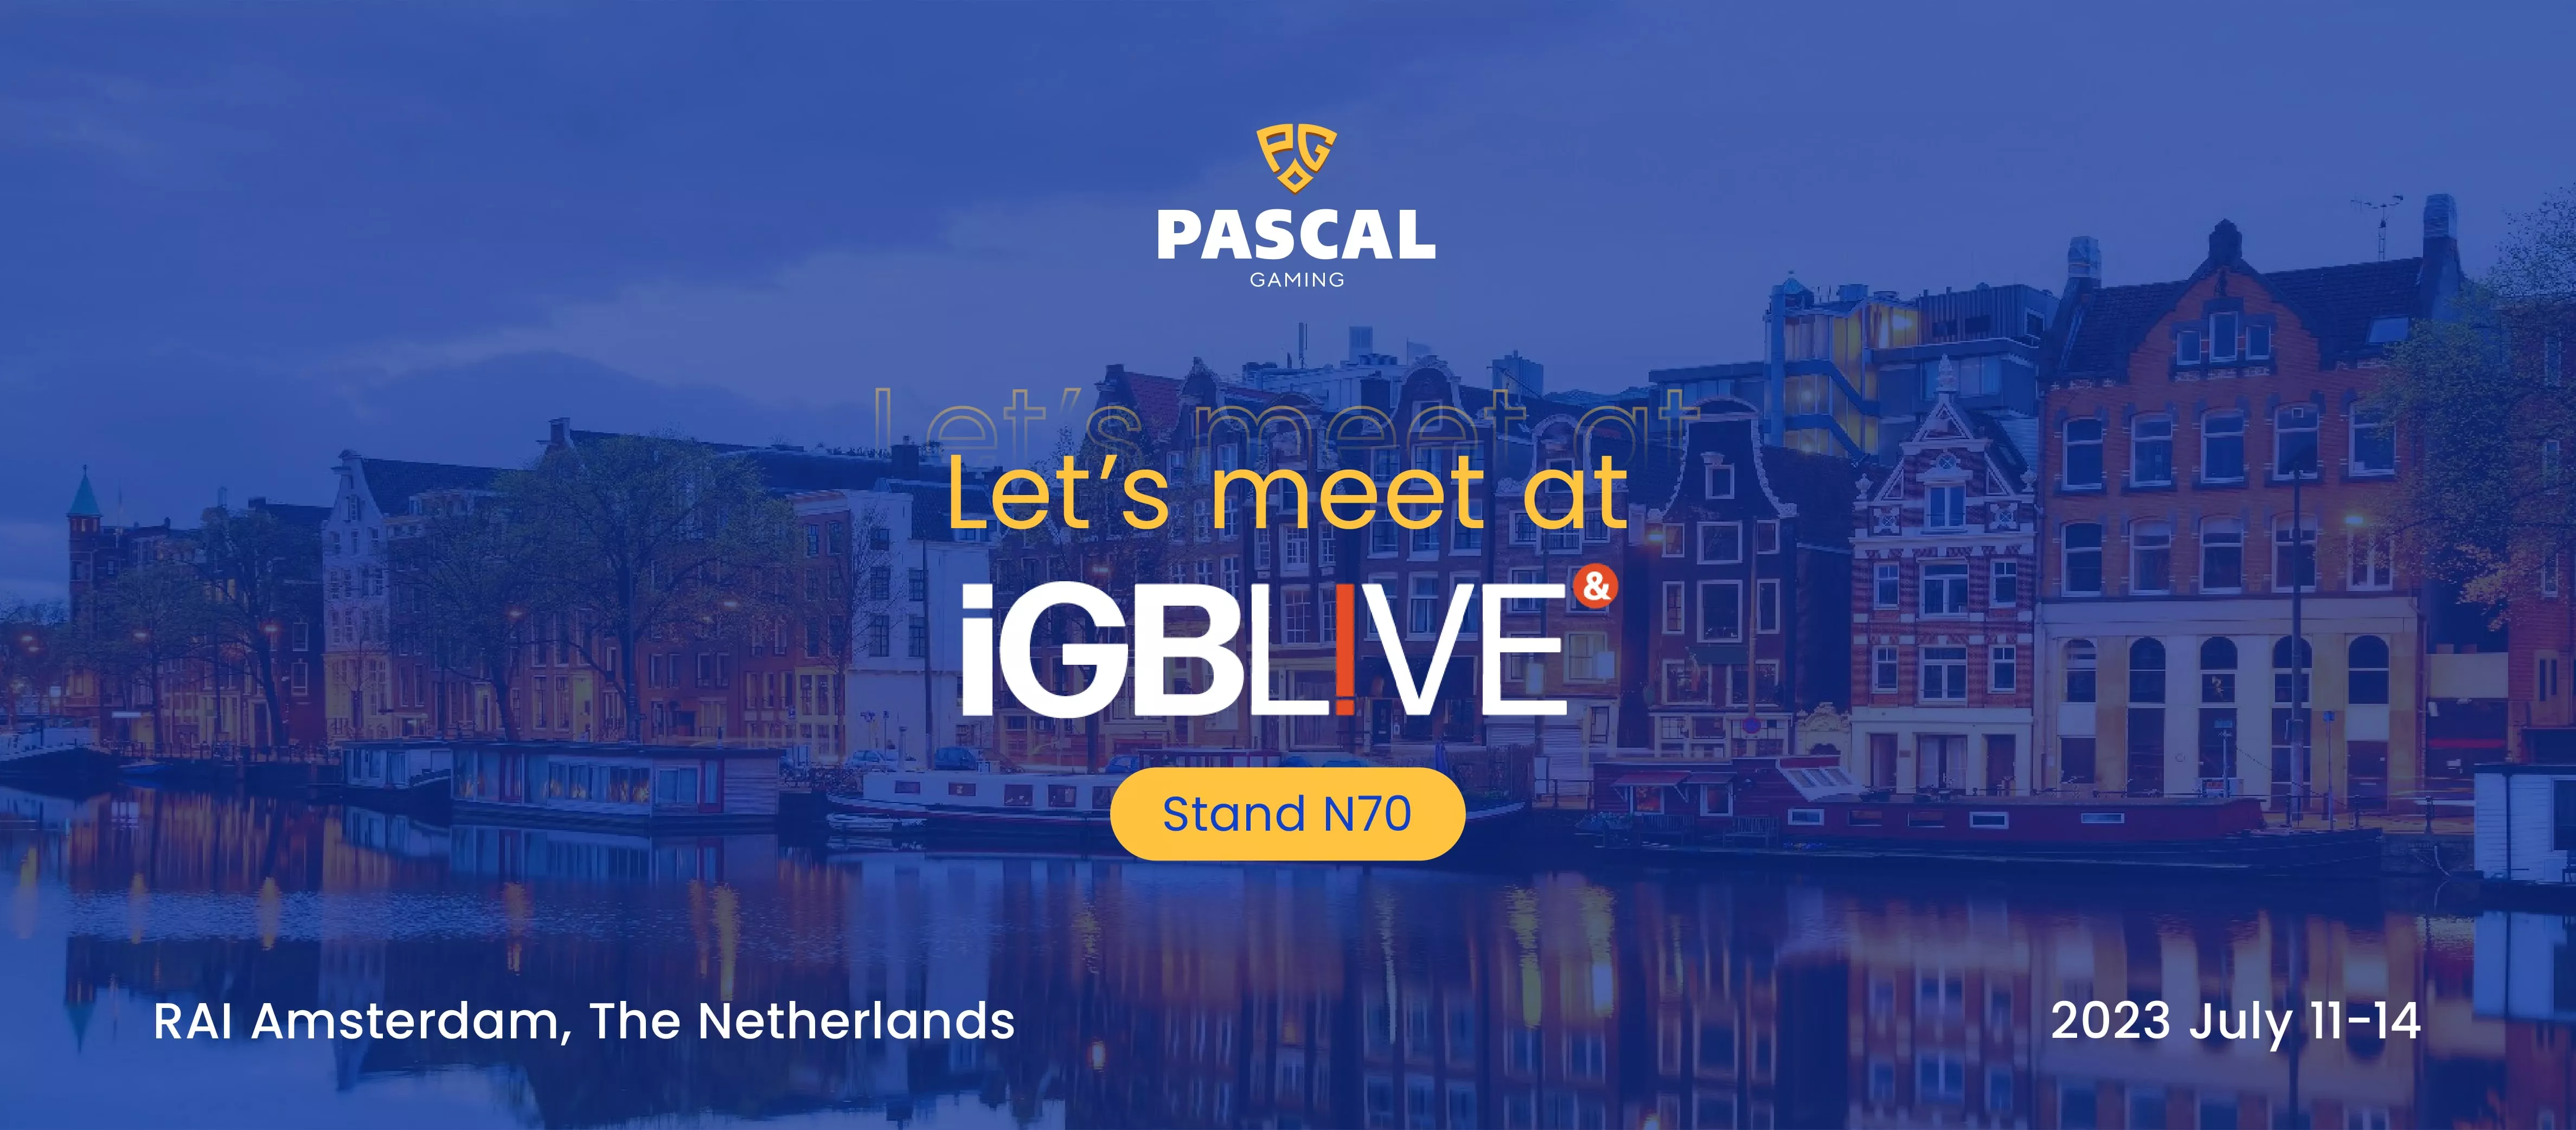 Pascal Gaming is heading to iGB Live Amsterdam